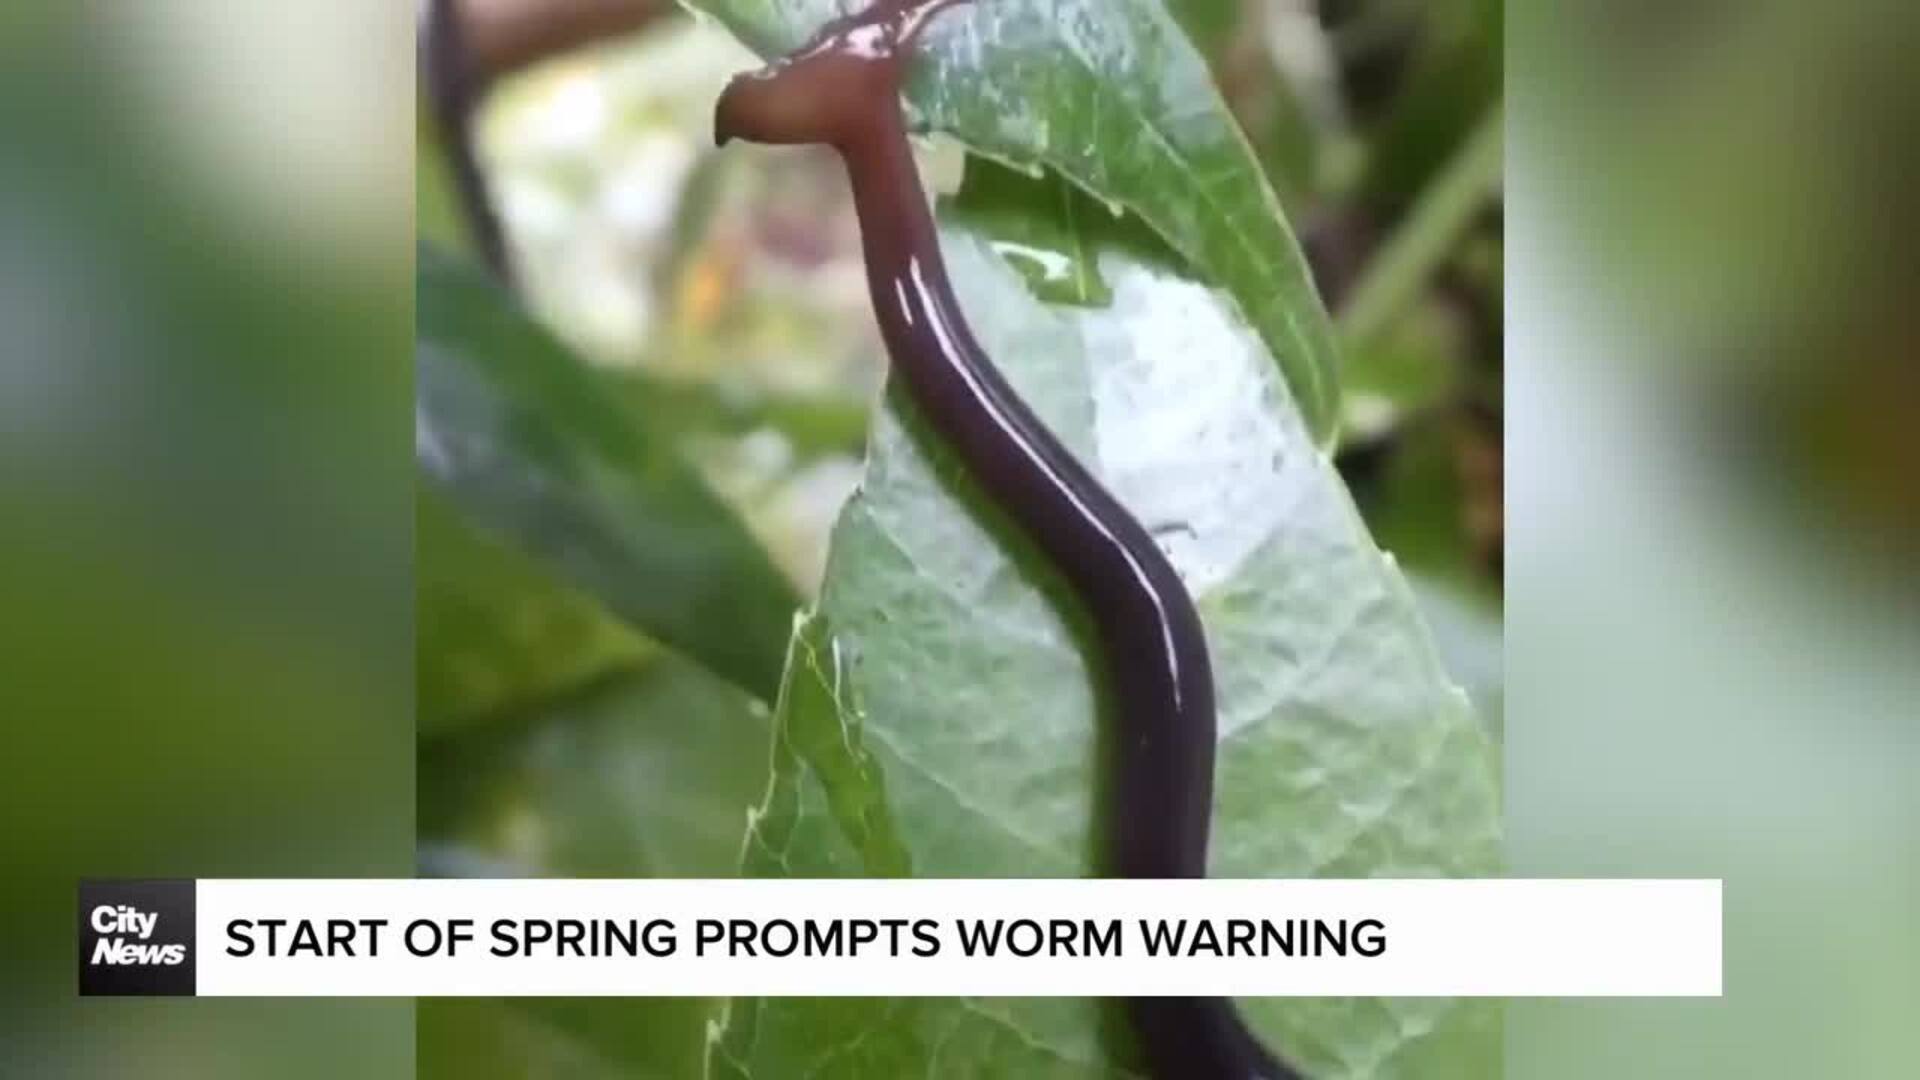 Start of spring prompts worm warning